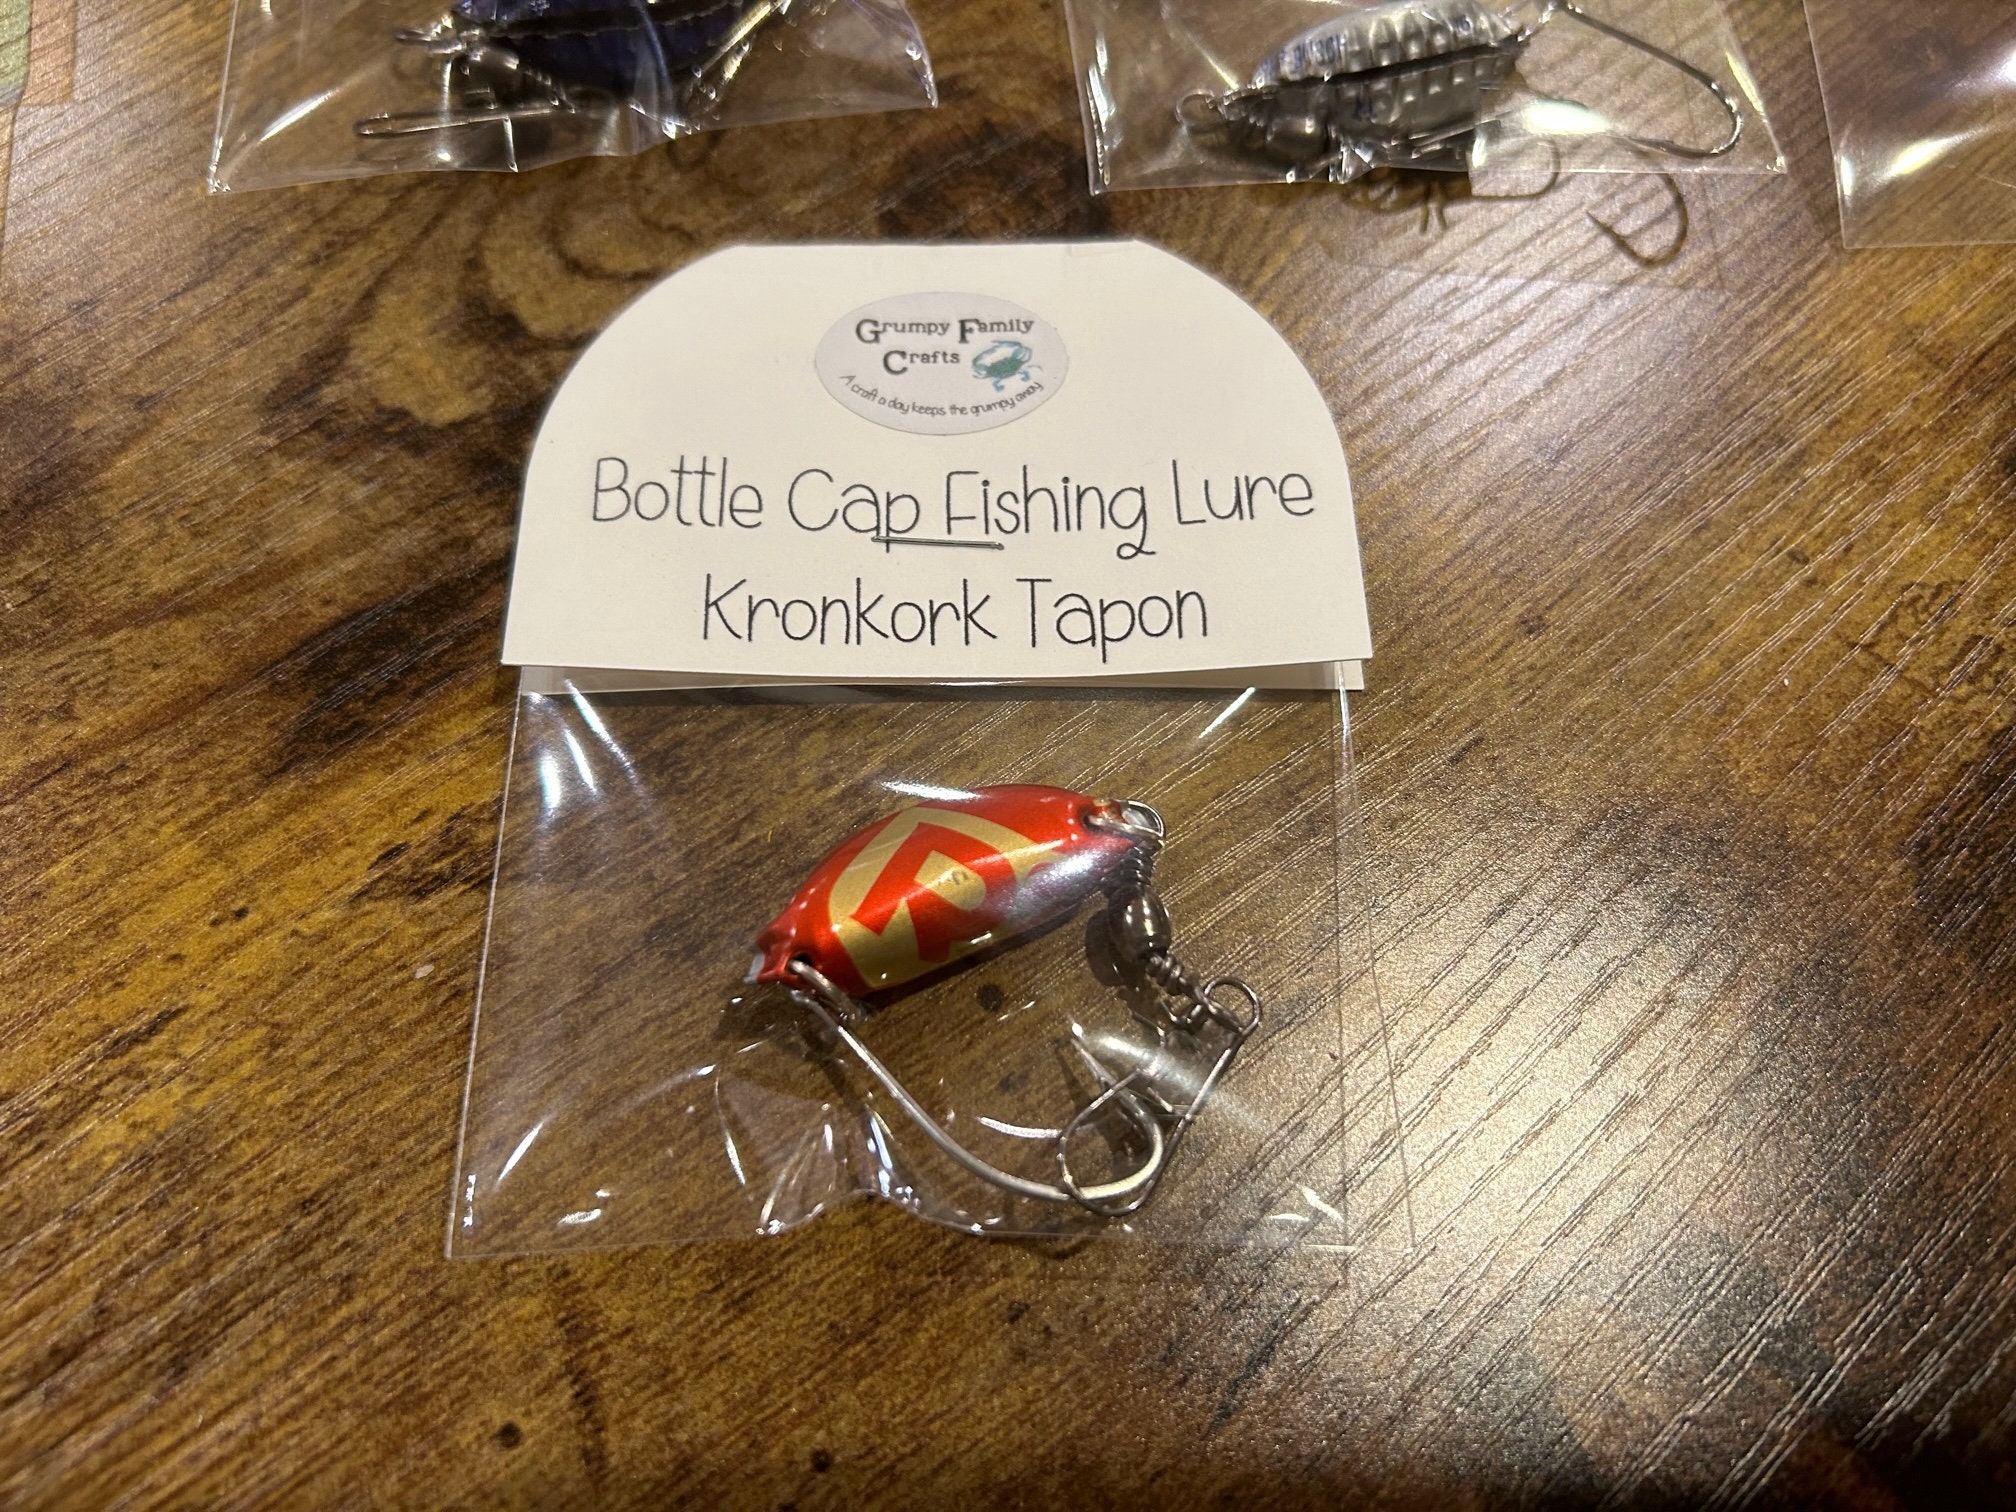 Bottle Cap Fishing Lures With Bbs for Weights / Stocking Stuffer 